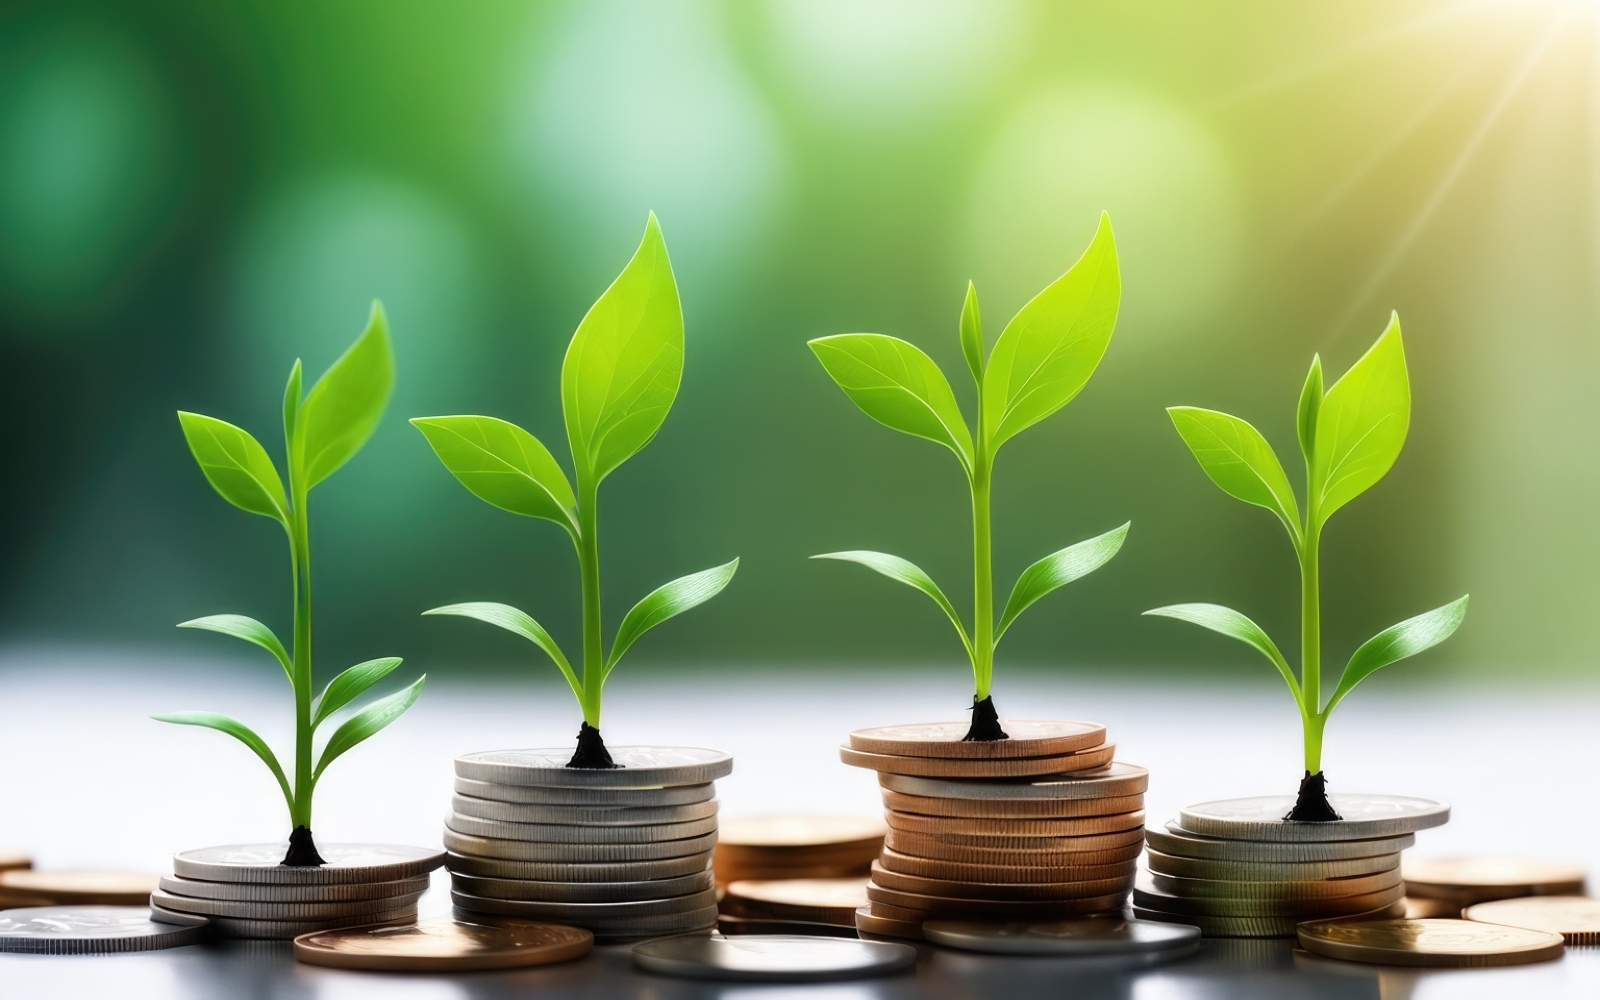 Premium Business Growing Plants on Coins Stacked on Green Blurred Background 30